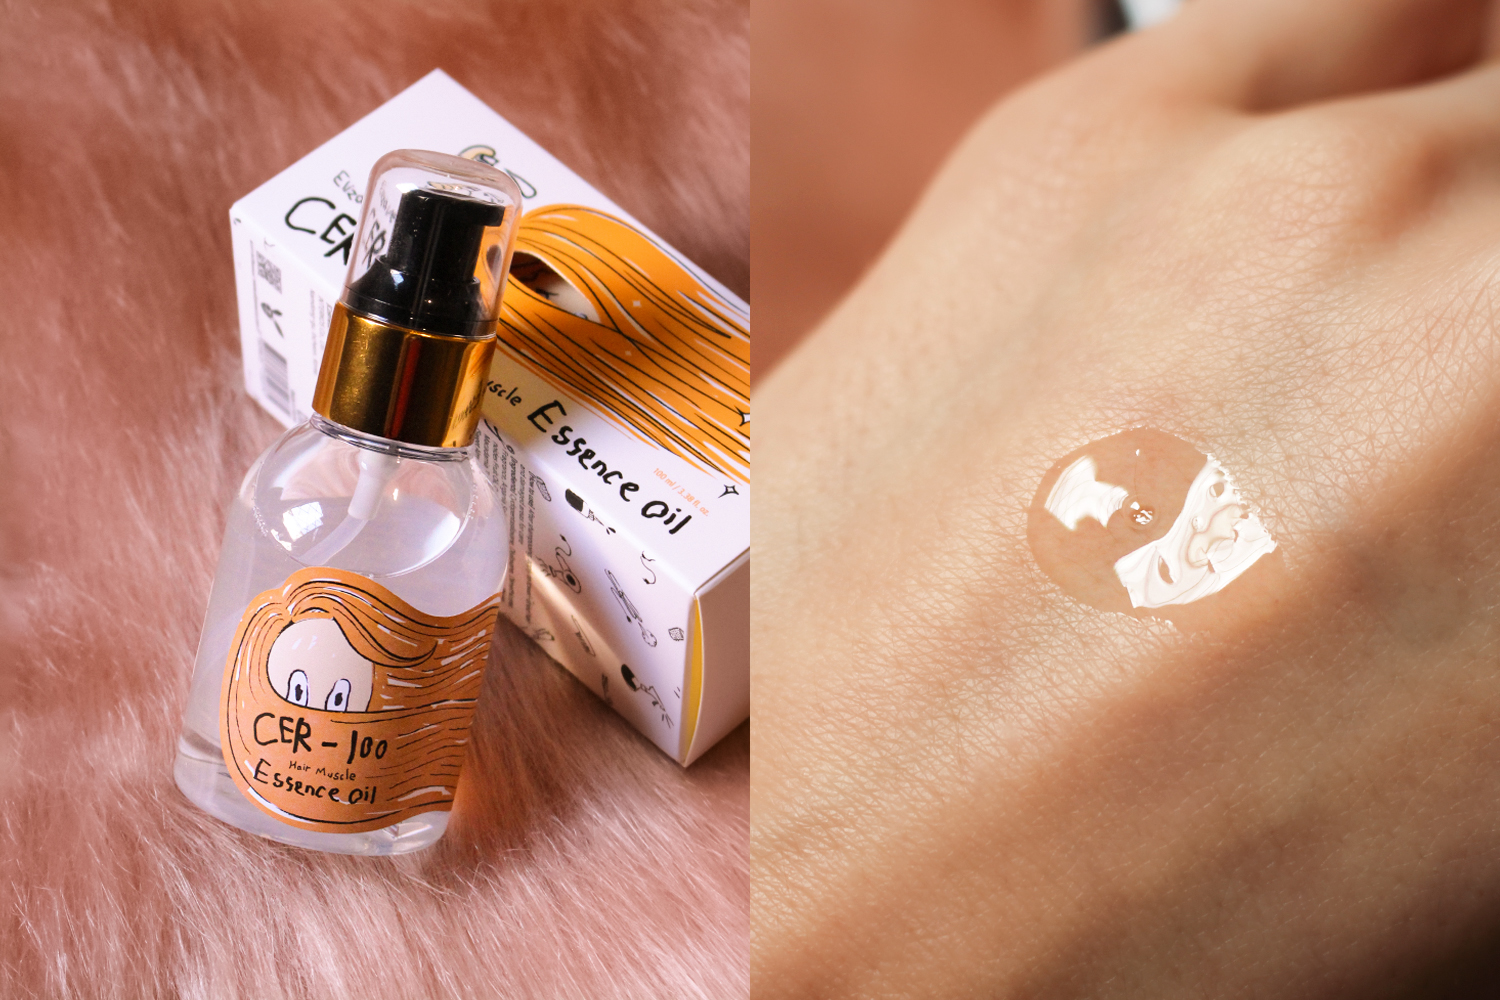 a bottle with cer-100 essence hair oil by k-beauty brand elizavecca and a swatch of this treatment on the skin